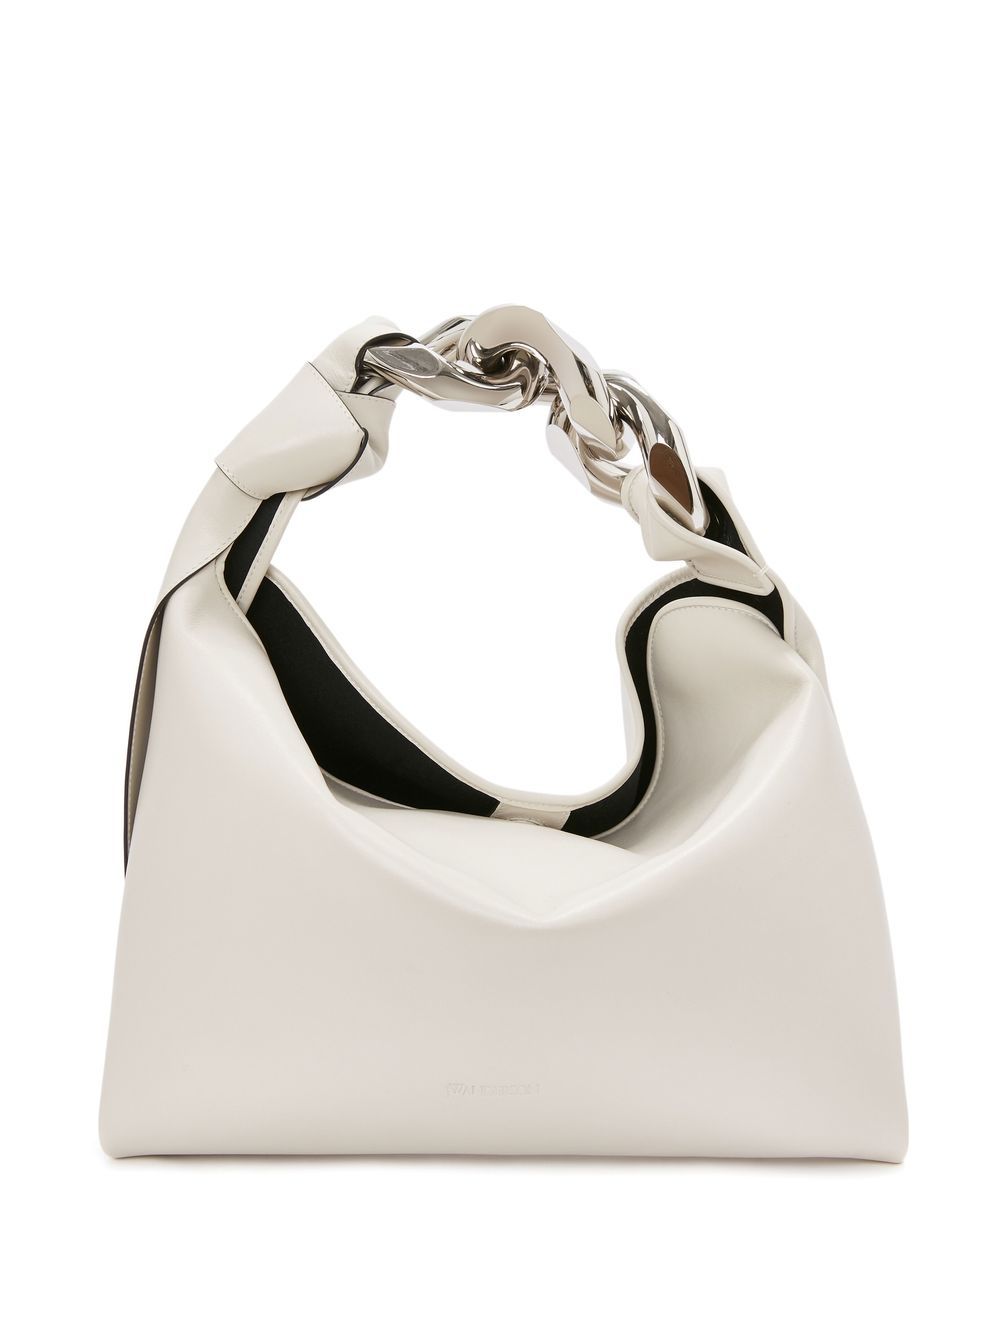 JW Anderson small Chain shoulder bag - White